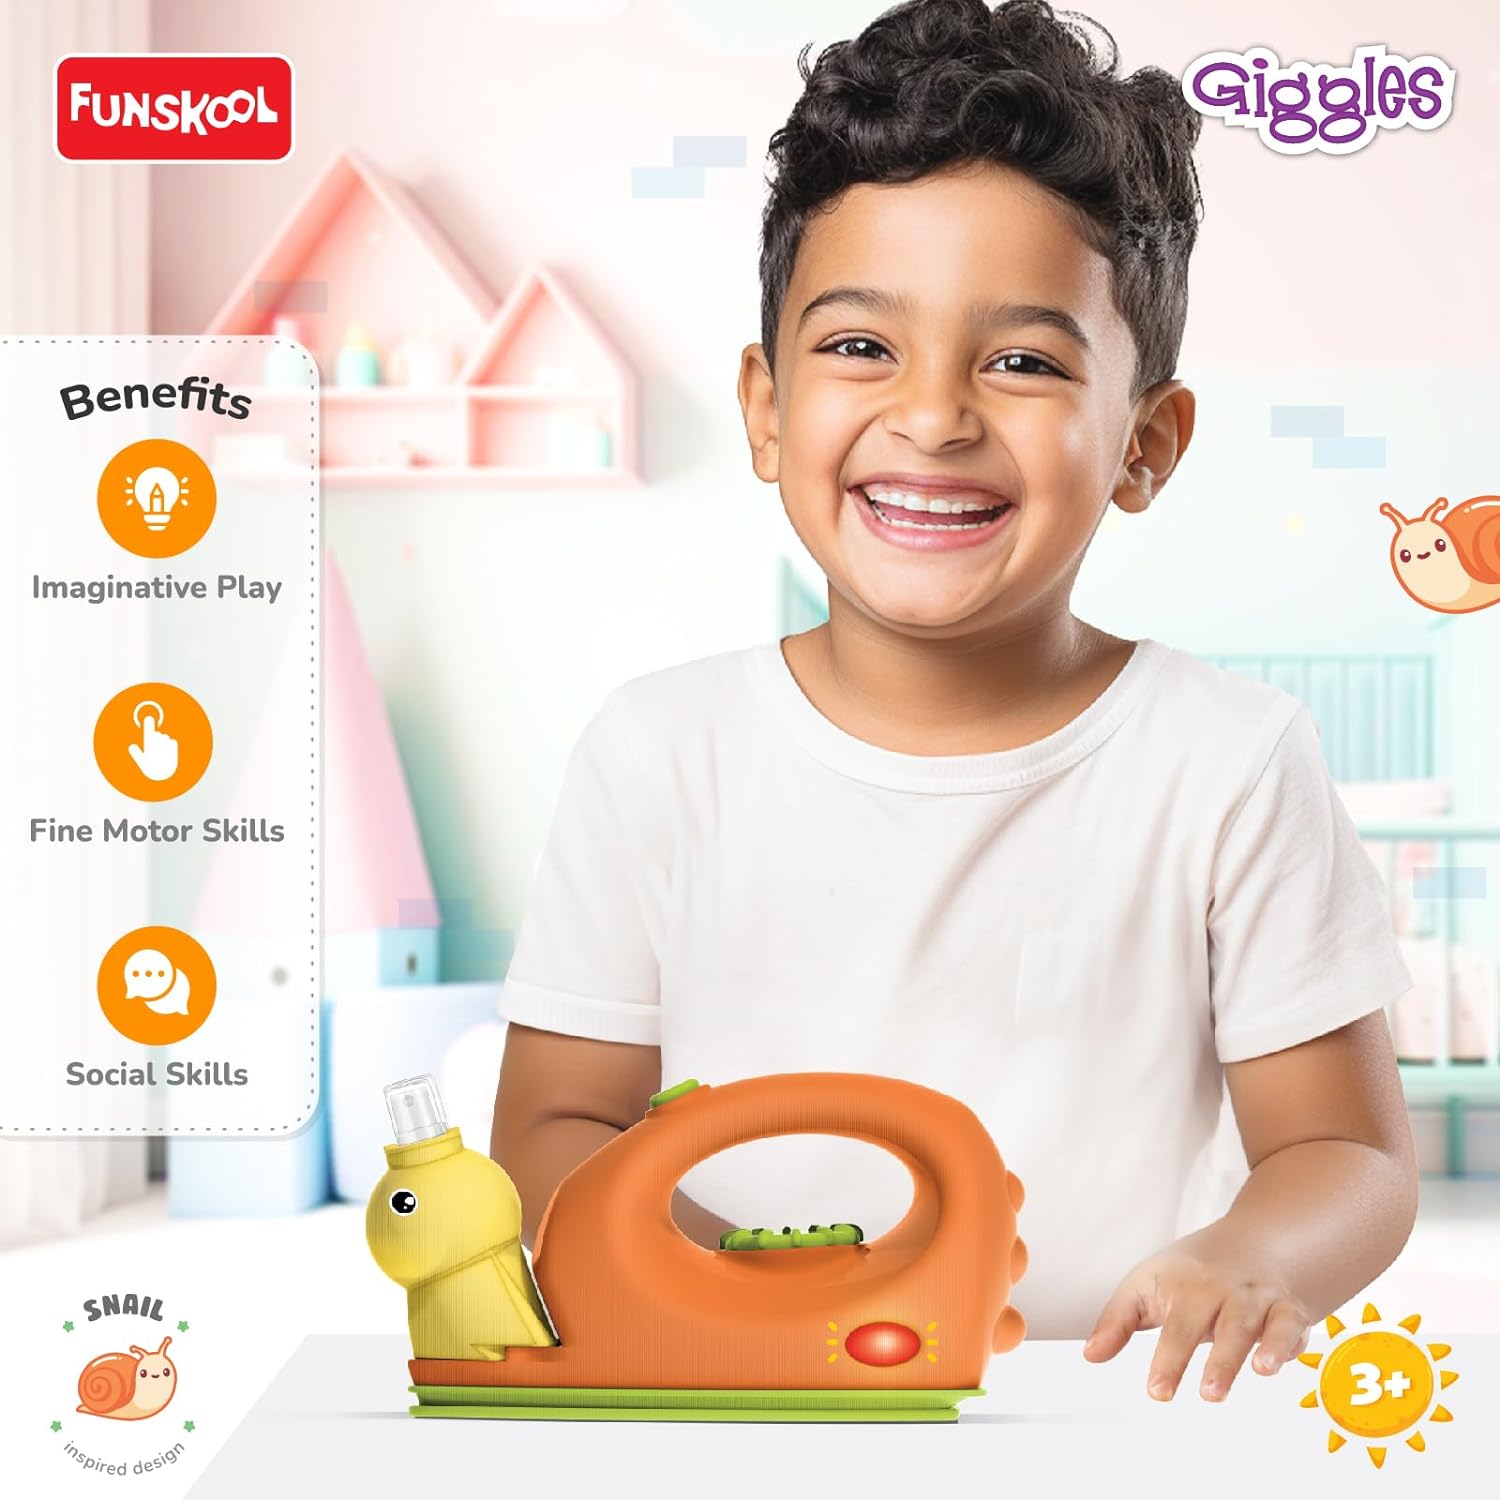 Funskool Giggles Playset Happy Lil Home-Iron, Snail Inspired Pretend Role-Play Toy with Electronic Lights & Sounds, for Kids 3 Year Old & Above.